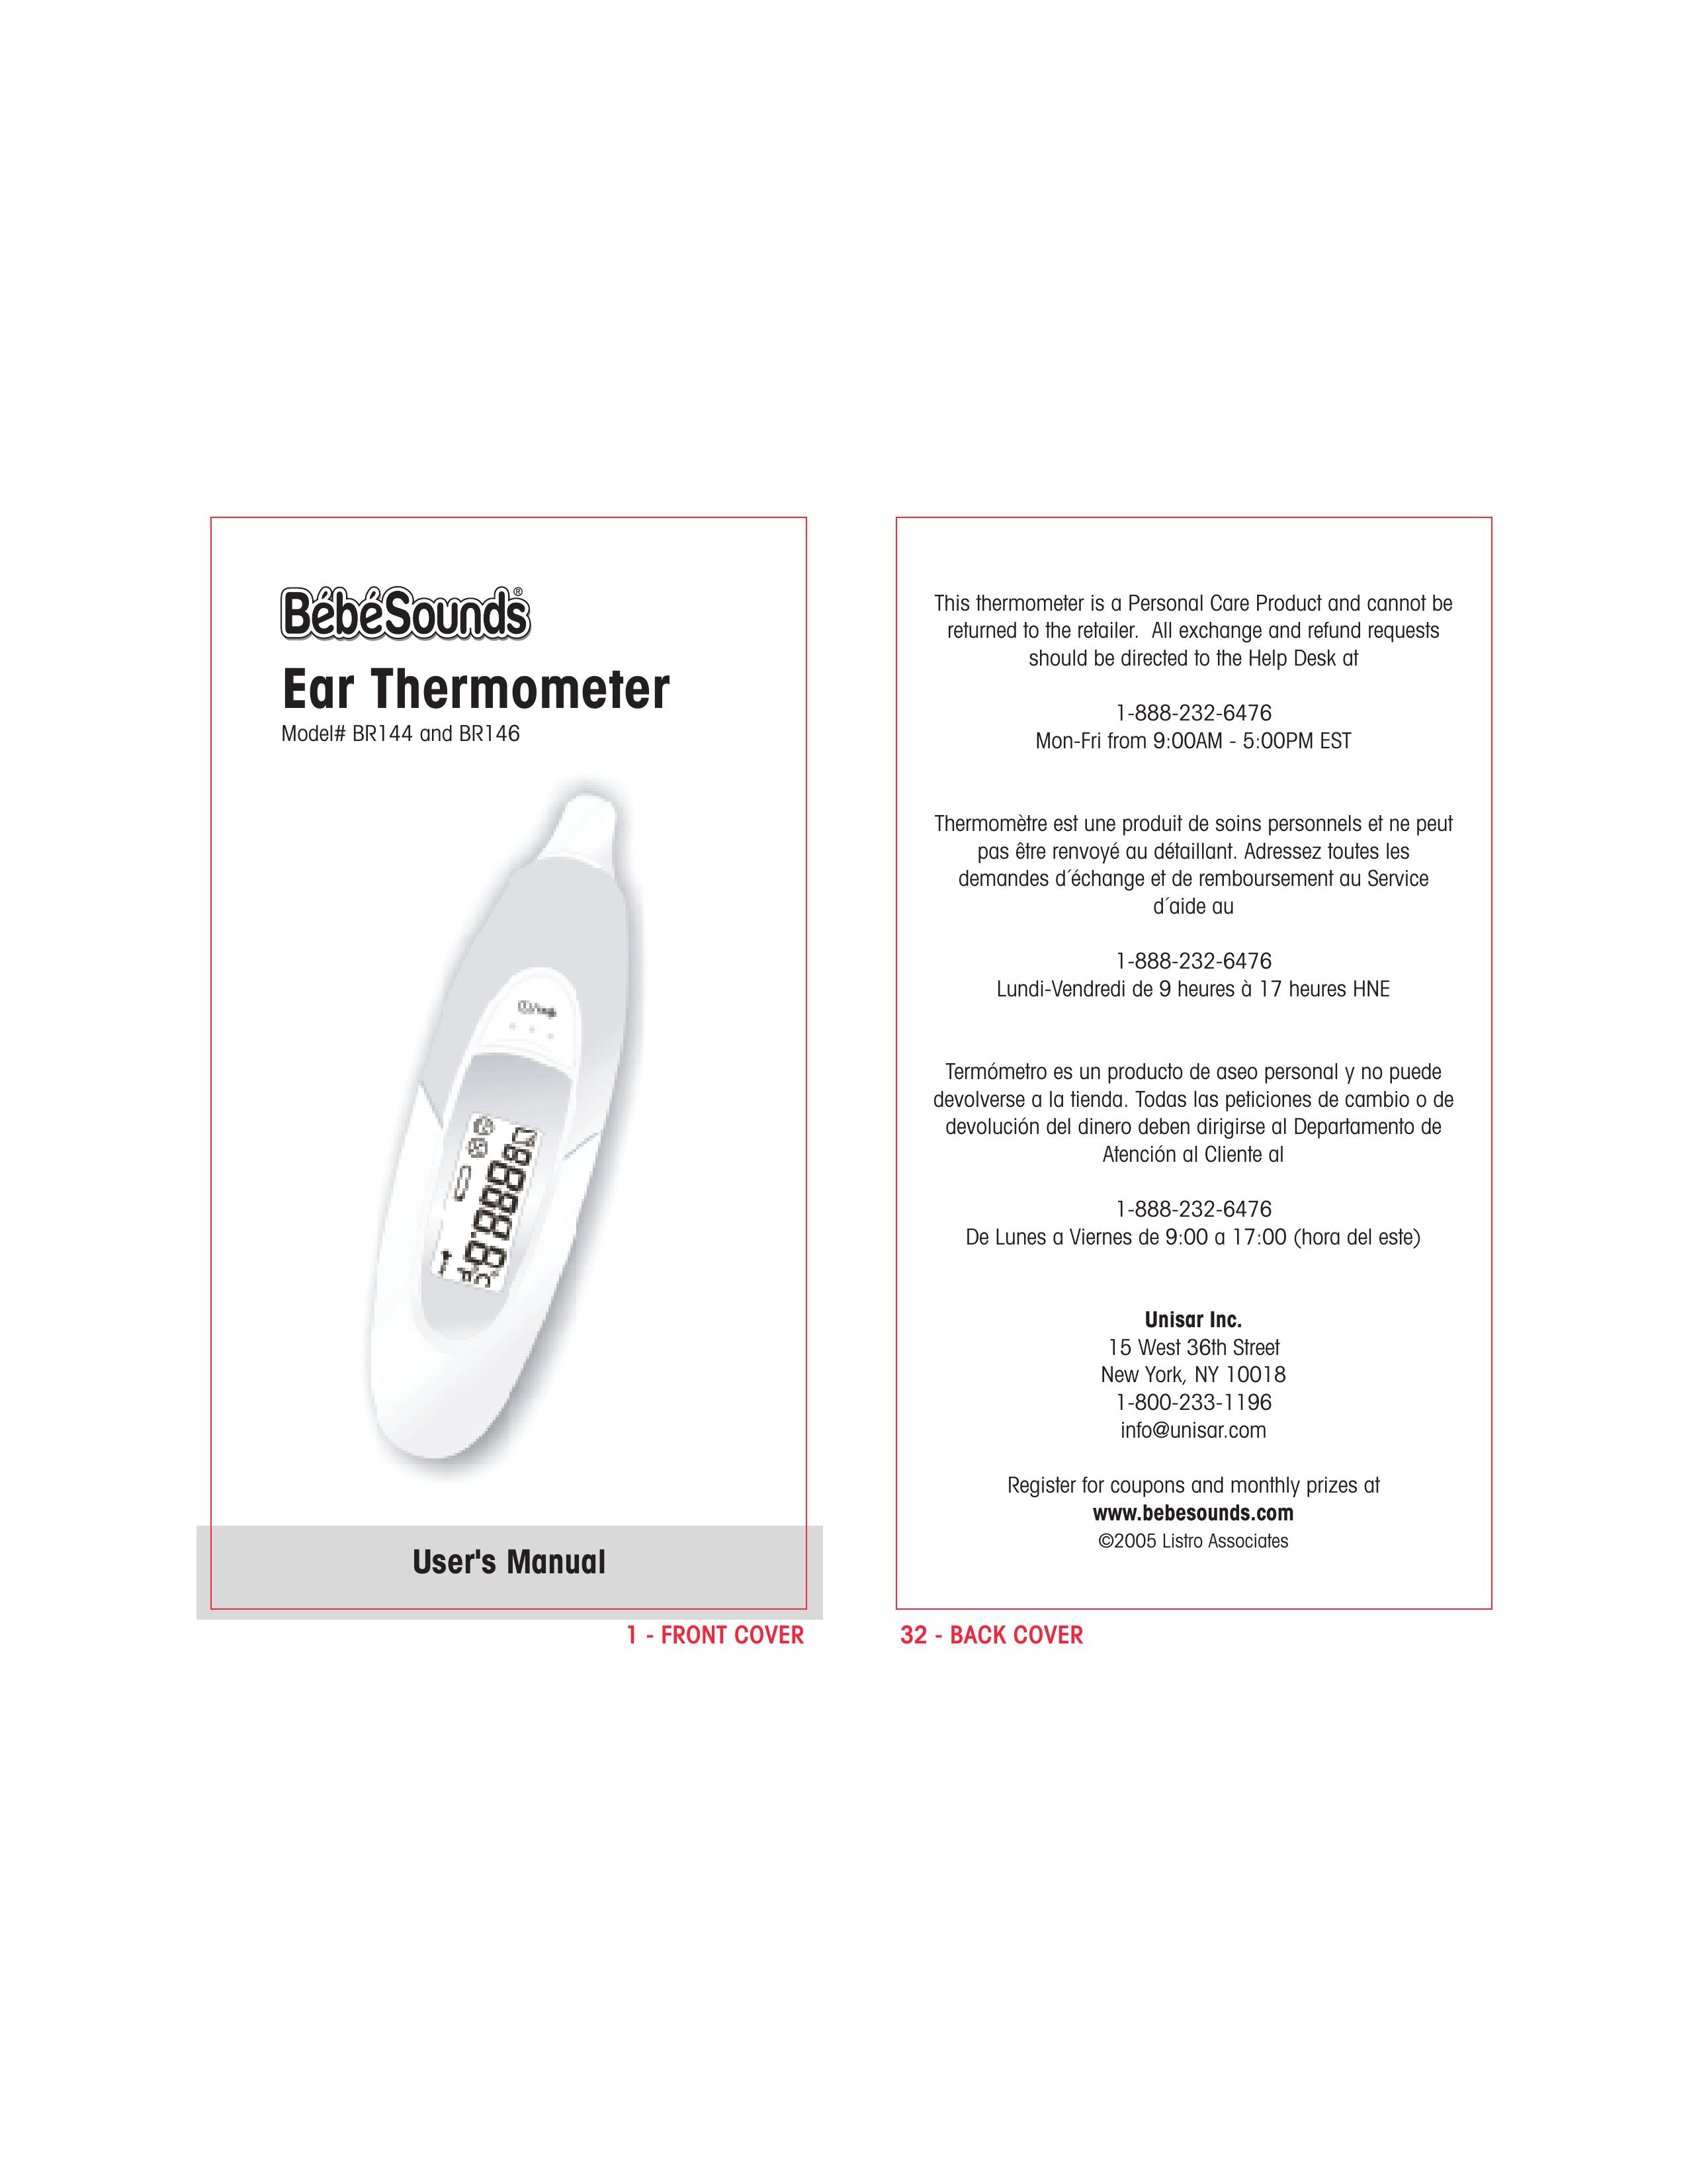 Bebe Sounds BR144 Thermometer User Manual